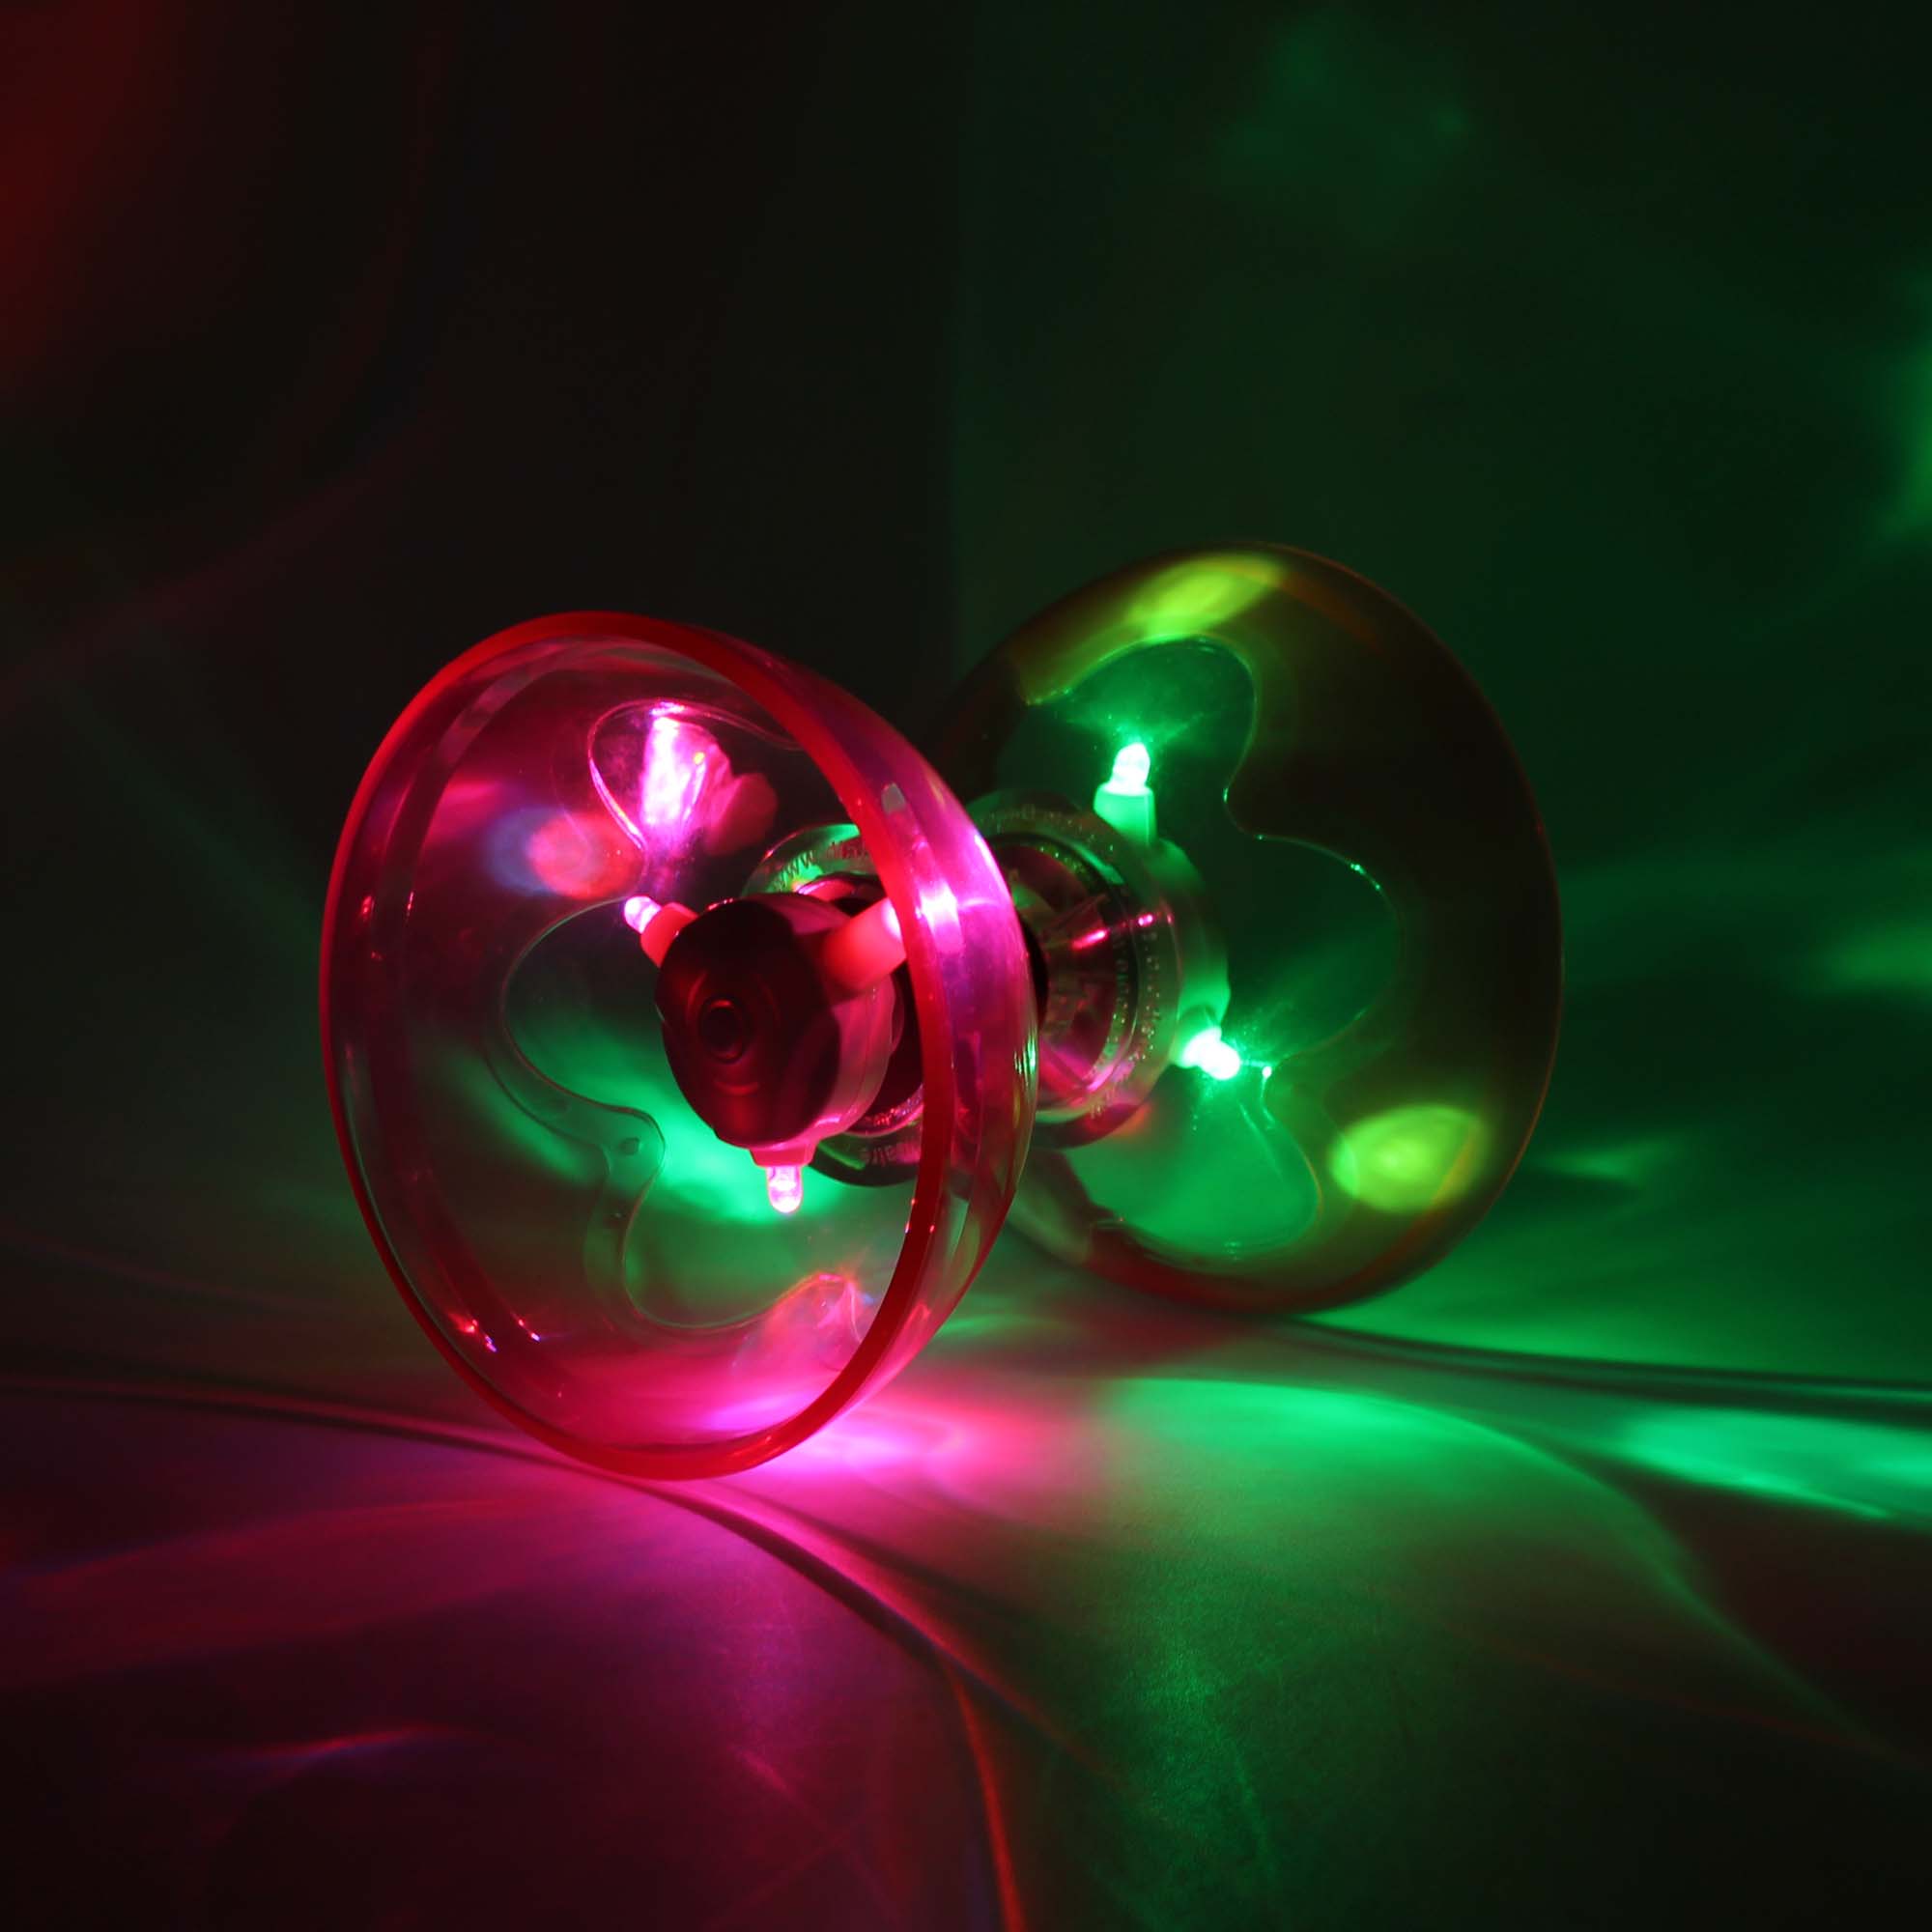 diabolo fitted with LED units glowing